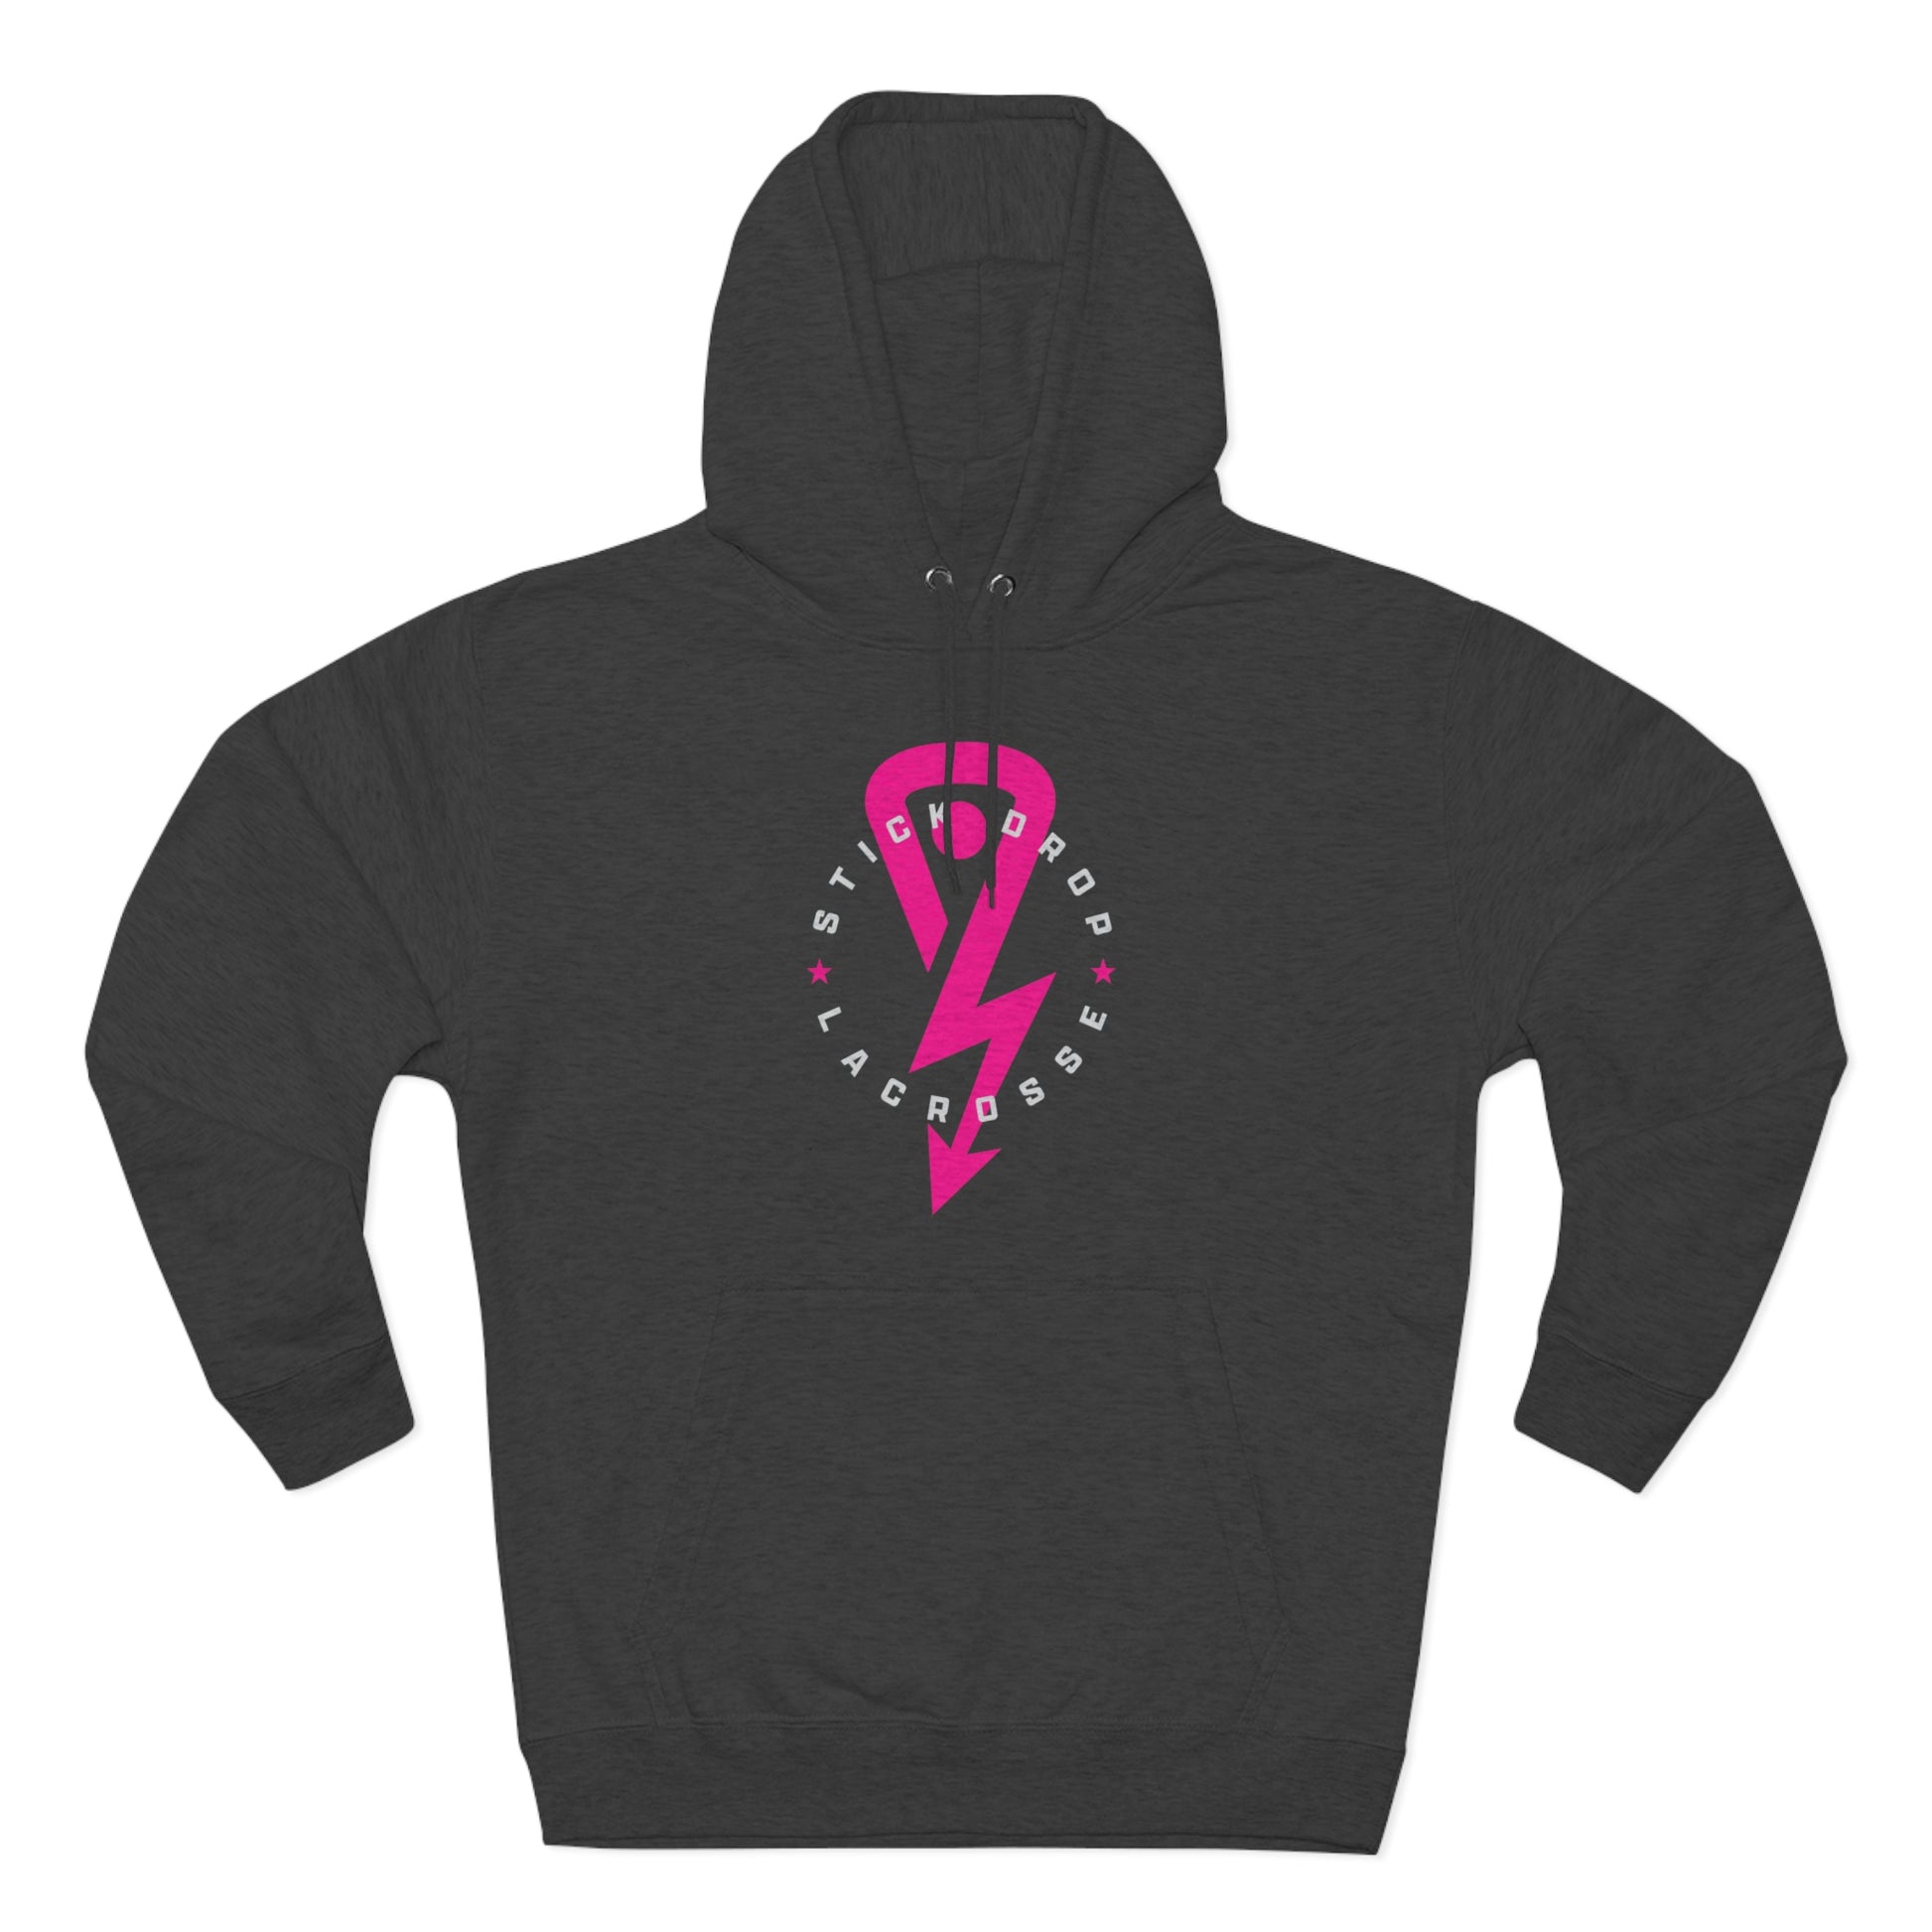 Black Stick Drop Lax Logo hoodie with hot pink logo and white lettering